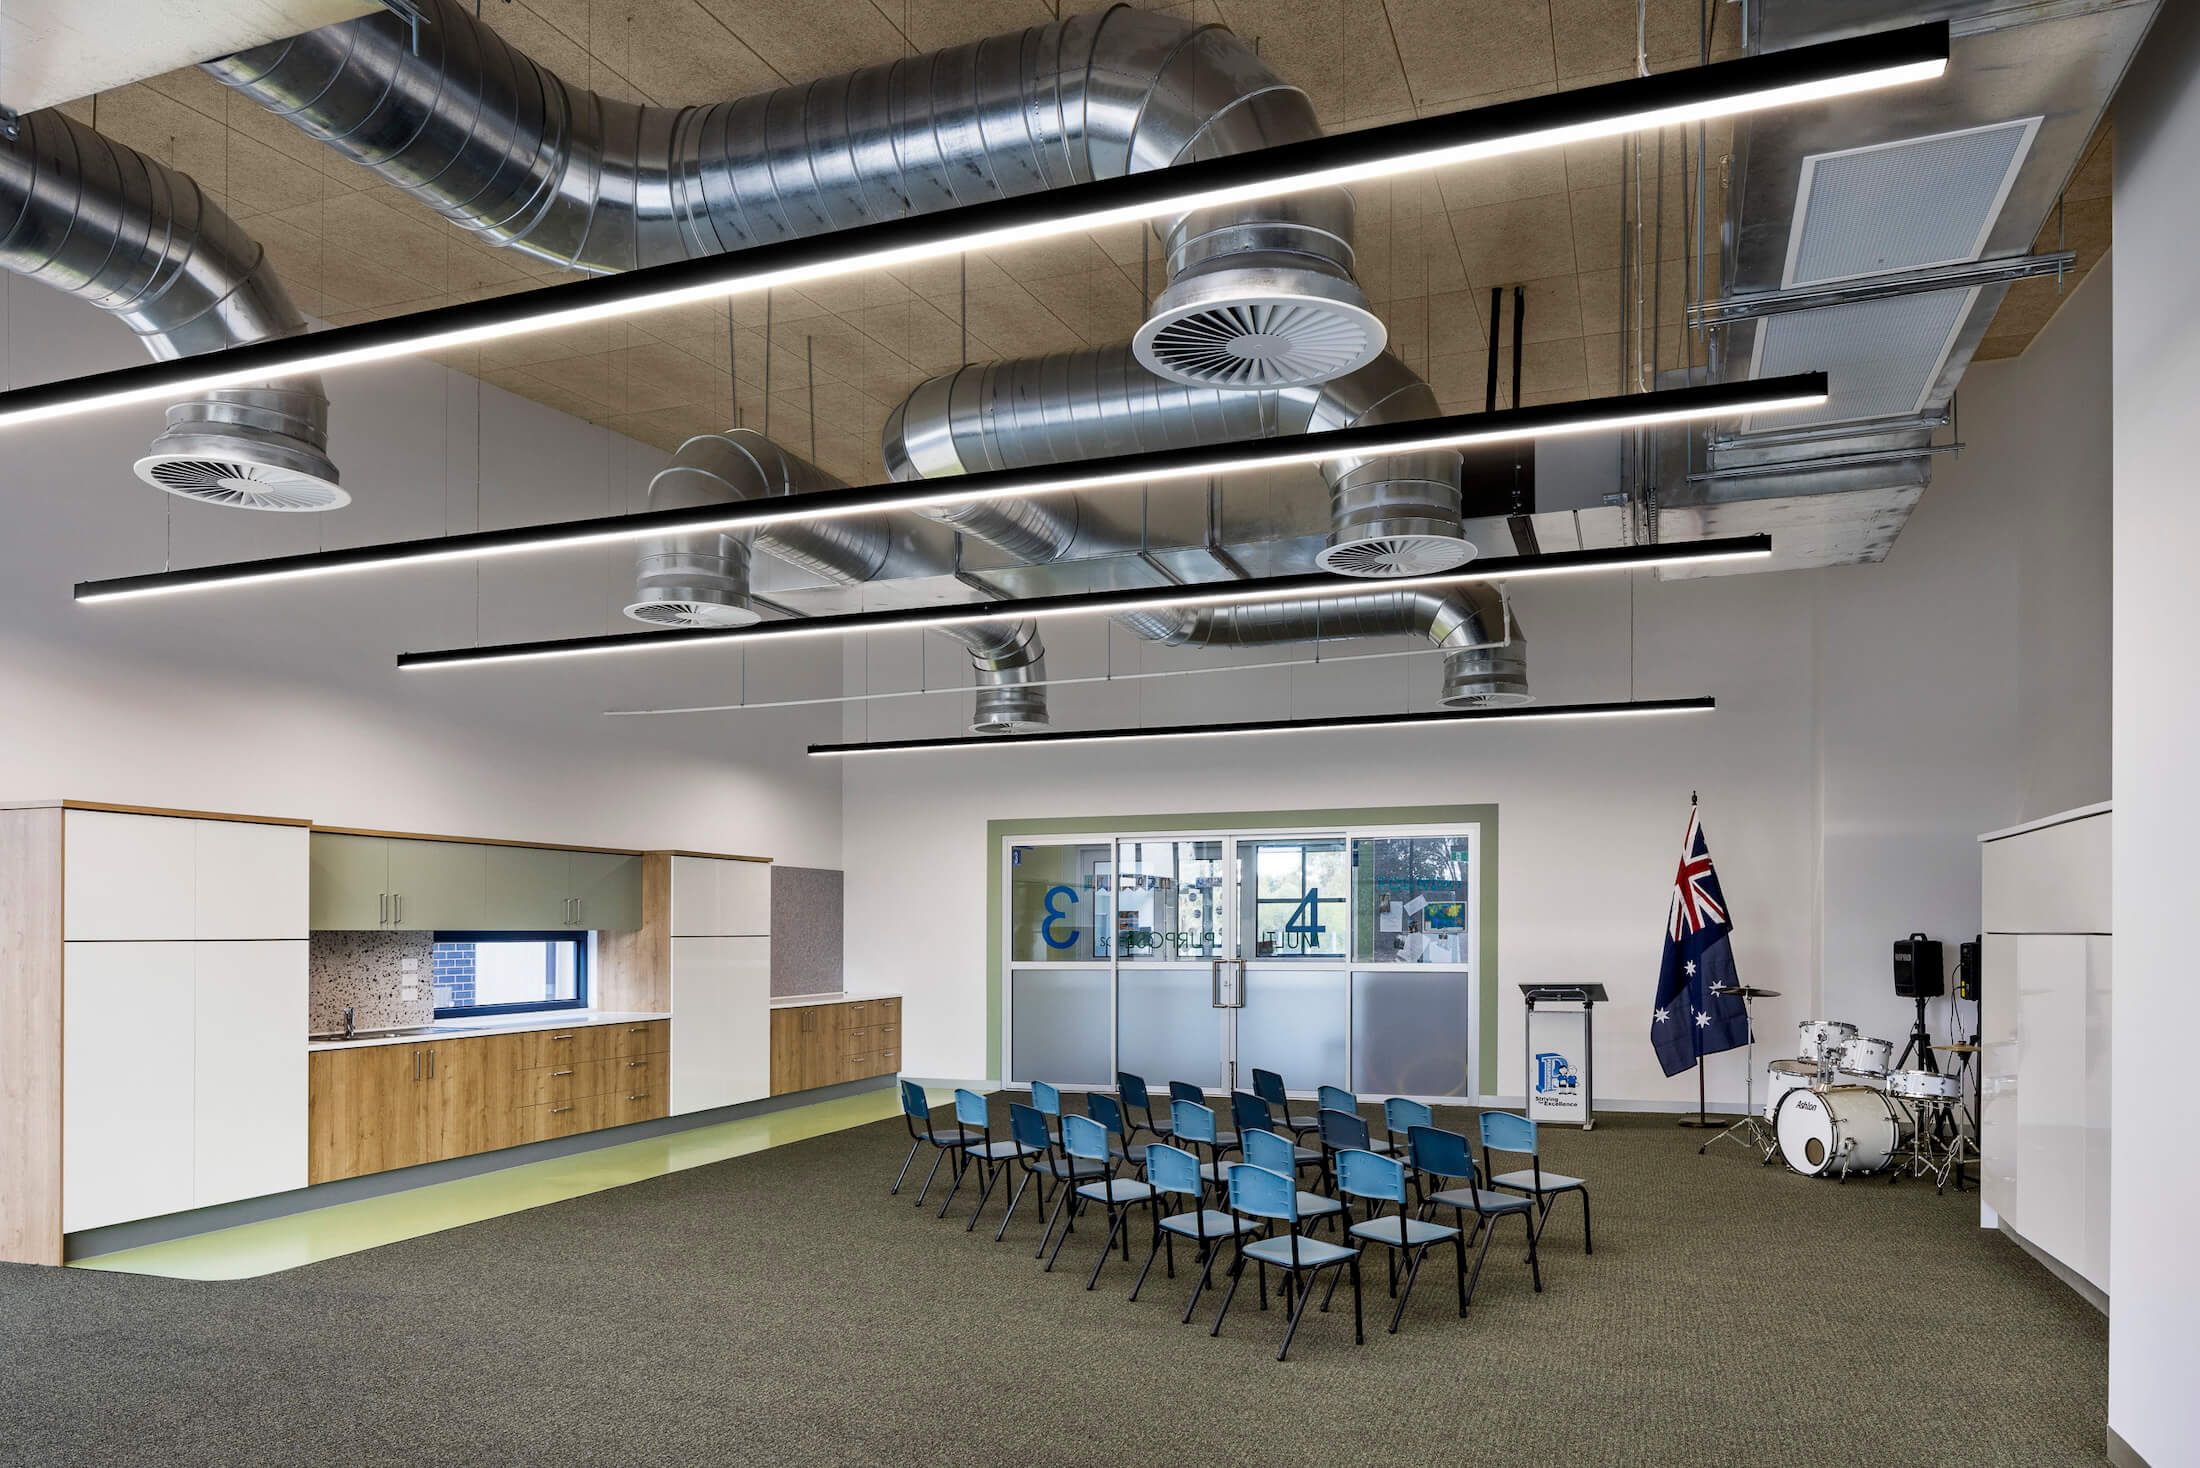 Carpeted classroom with kitchenette, drums and Australian flag, chairs assembled, ducted ventilation above.